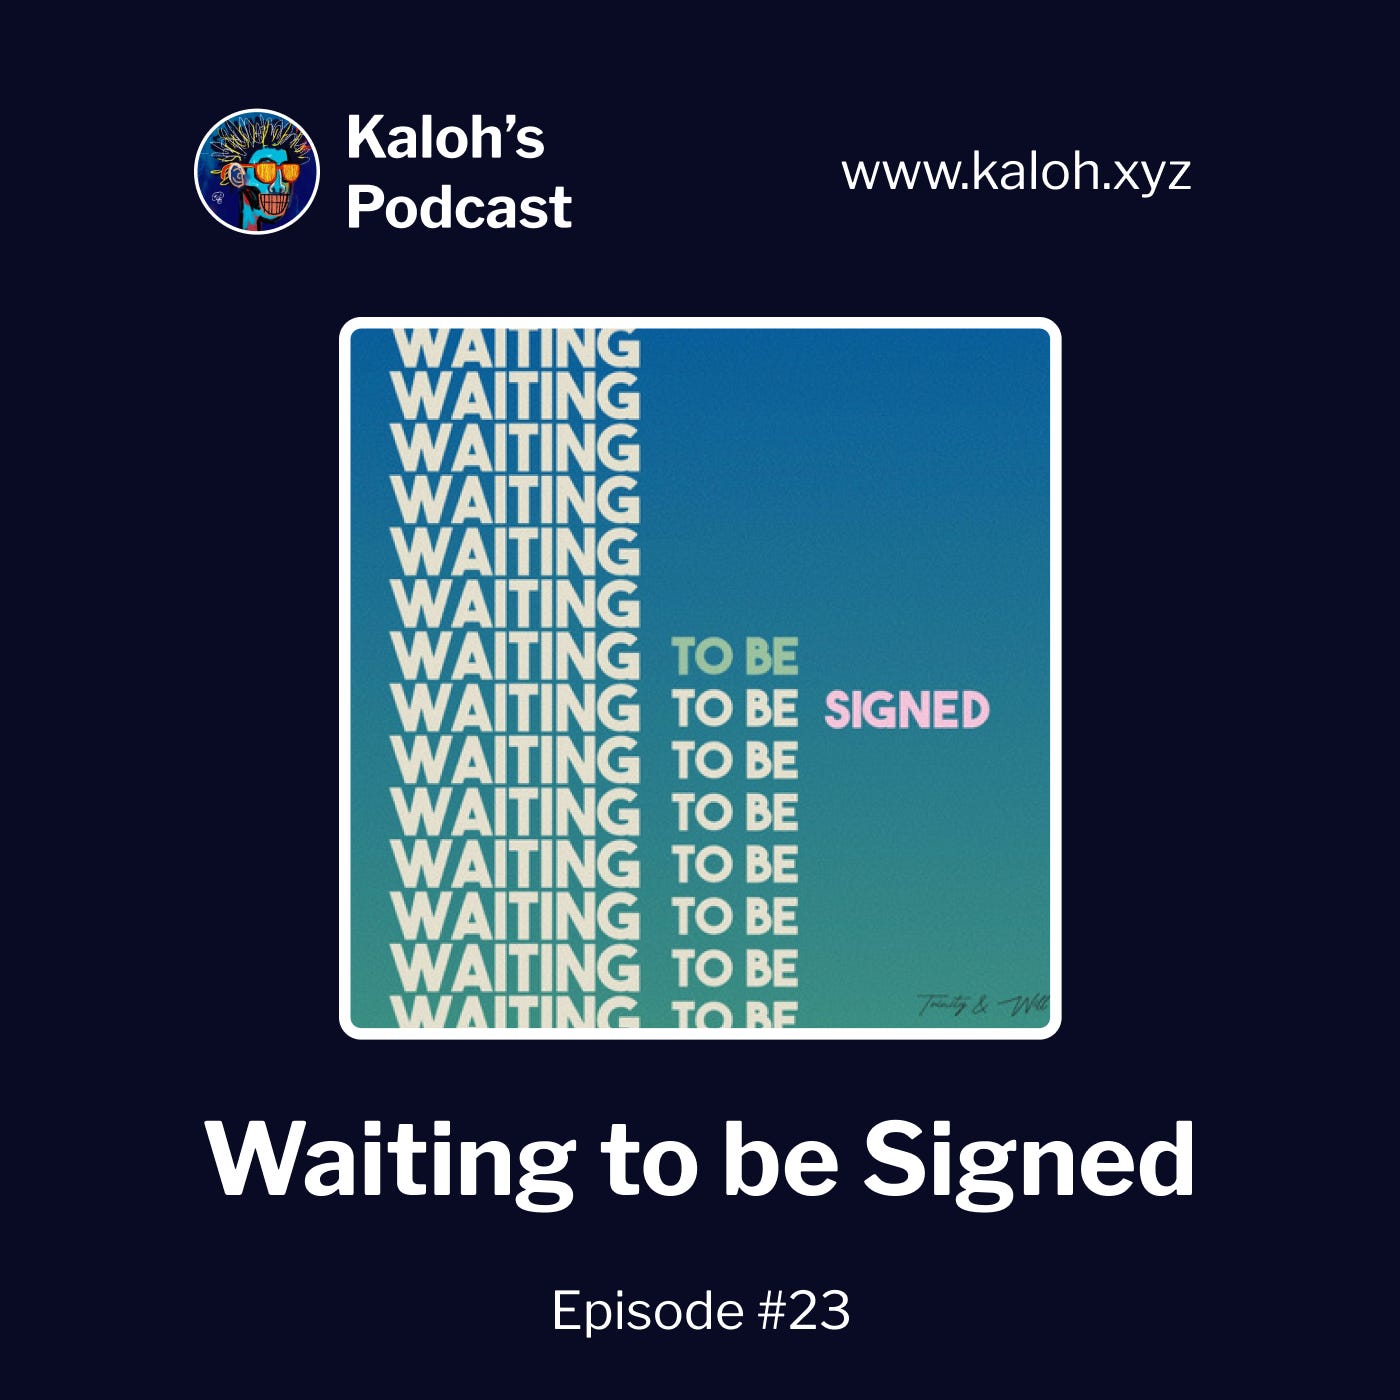 Kaloh's Podcast Episode 23: Waiting to be signed